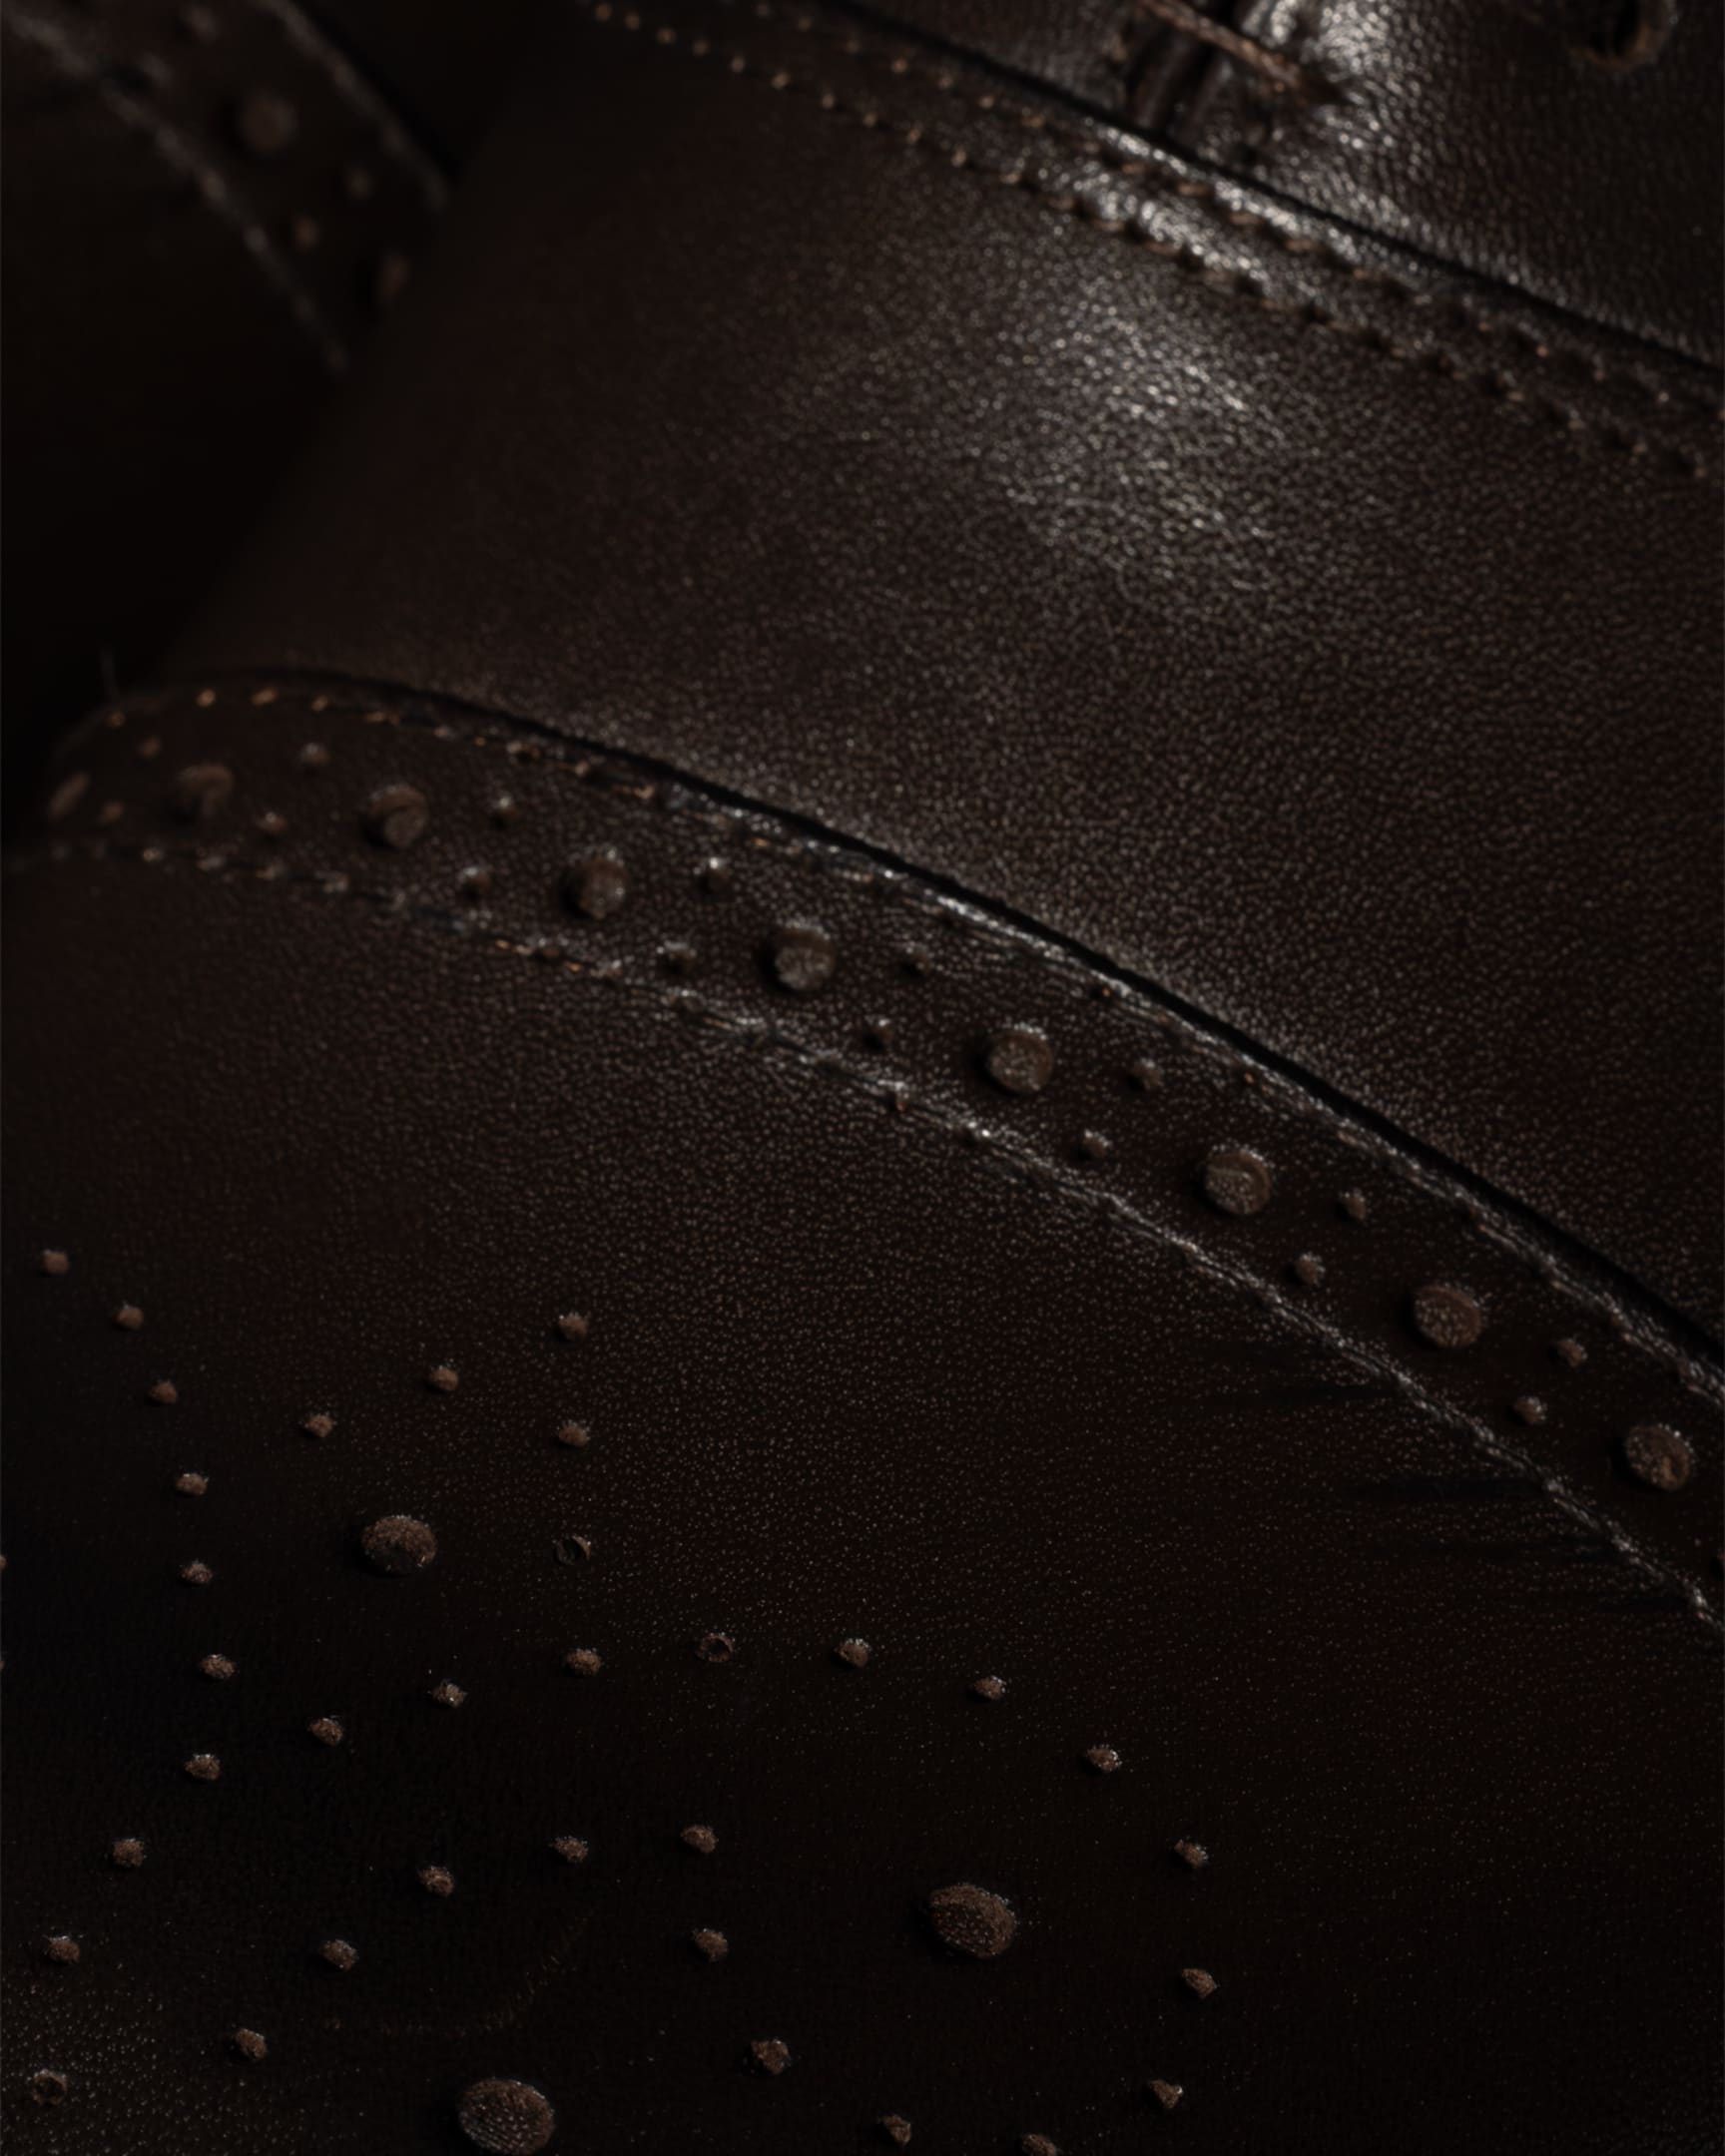 Detail View - Dark Brown Leather 'Maltby' Shoes Paul Smith